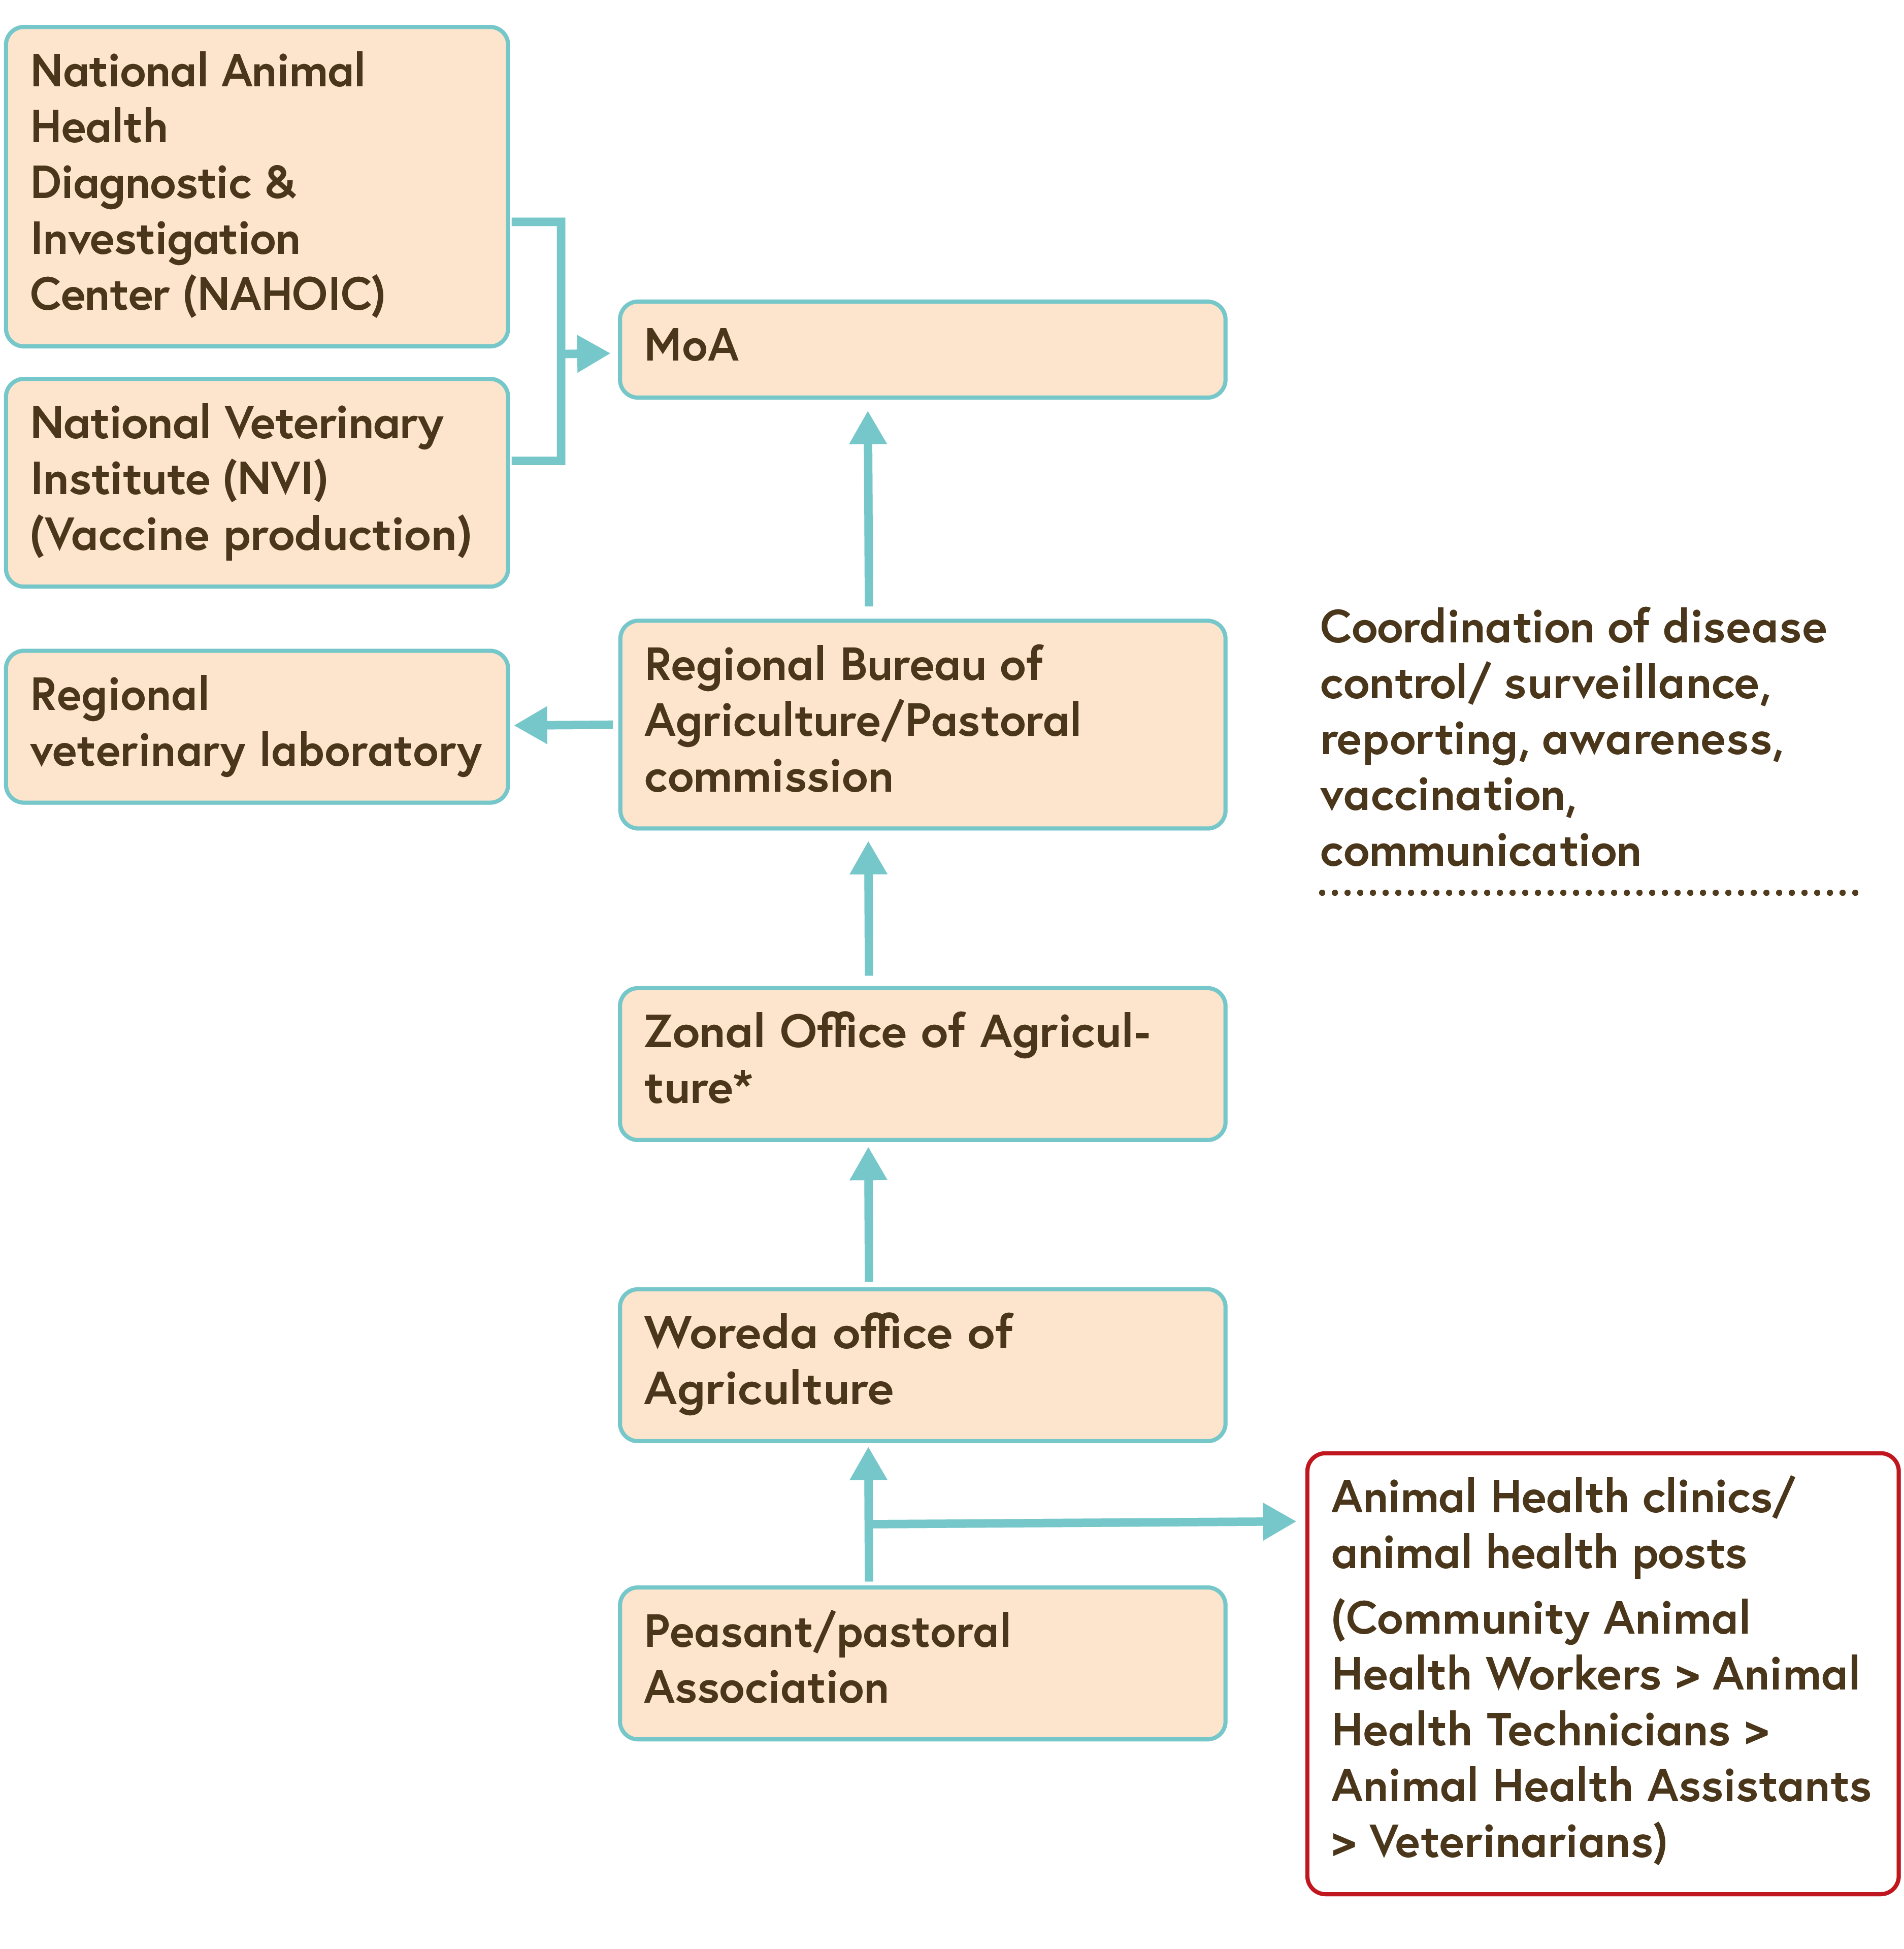 A chart showing the animal health system organisation in Ethiopia).